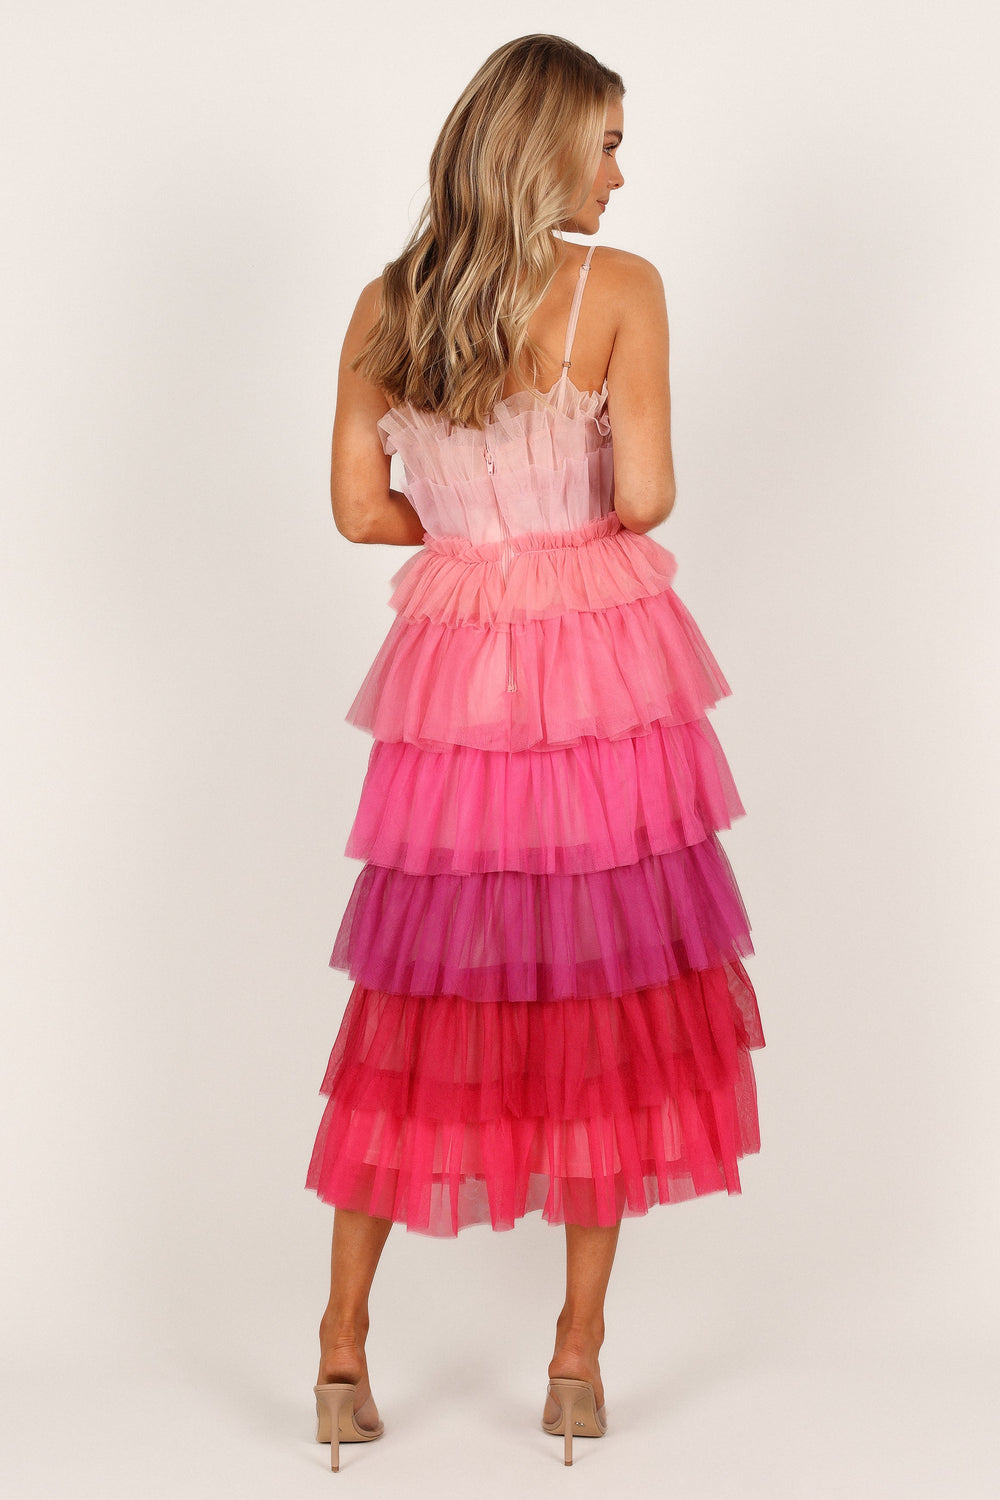 Petal and Pup USA DRESSES Minnie Tiered Tulle Midi Dress - Pink